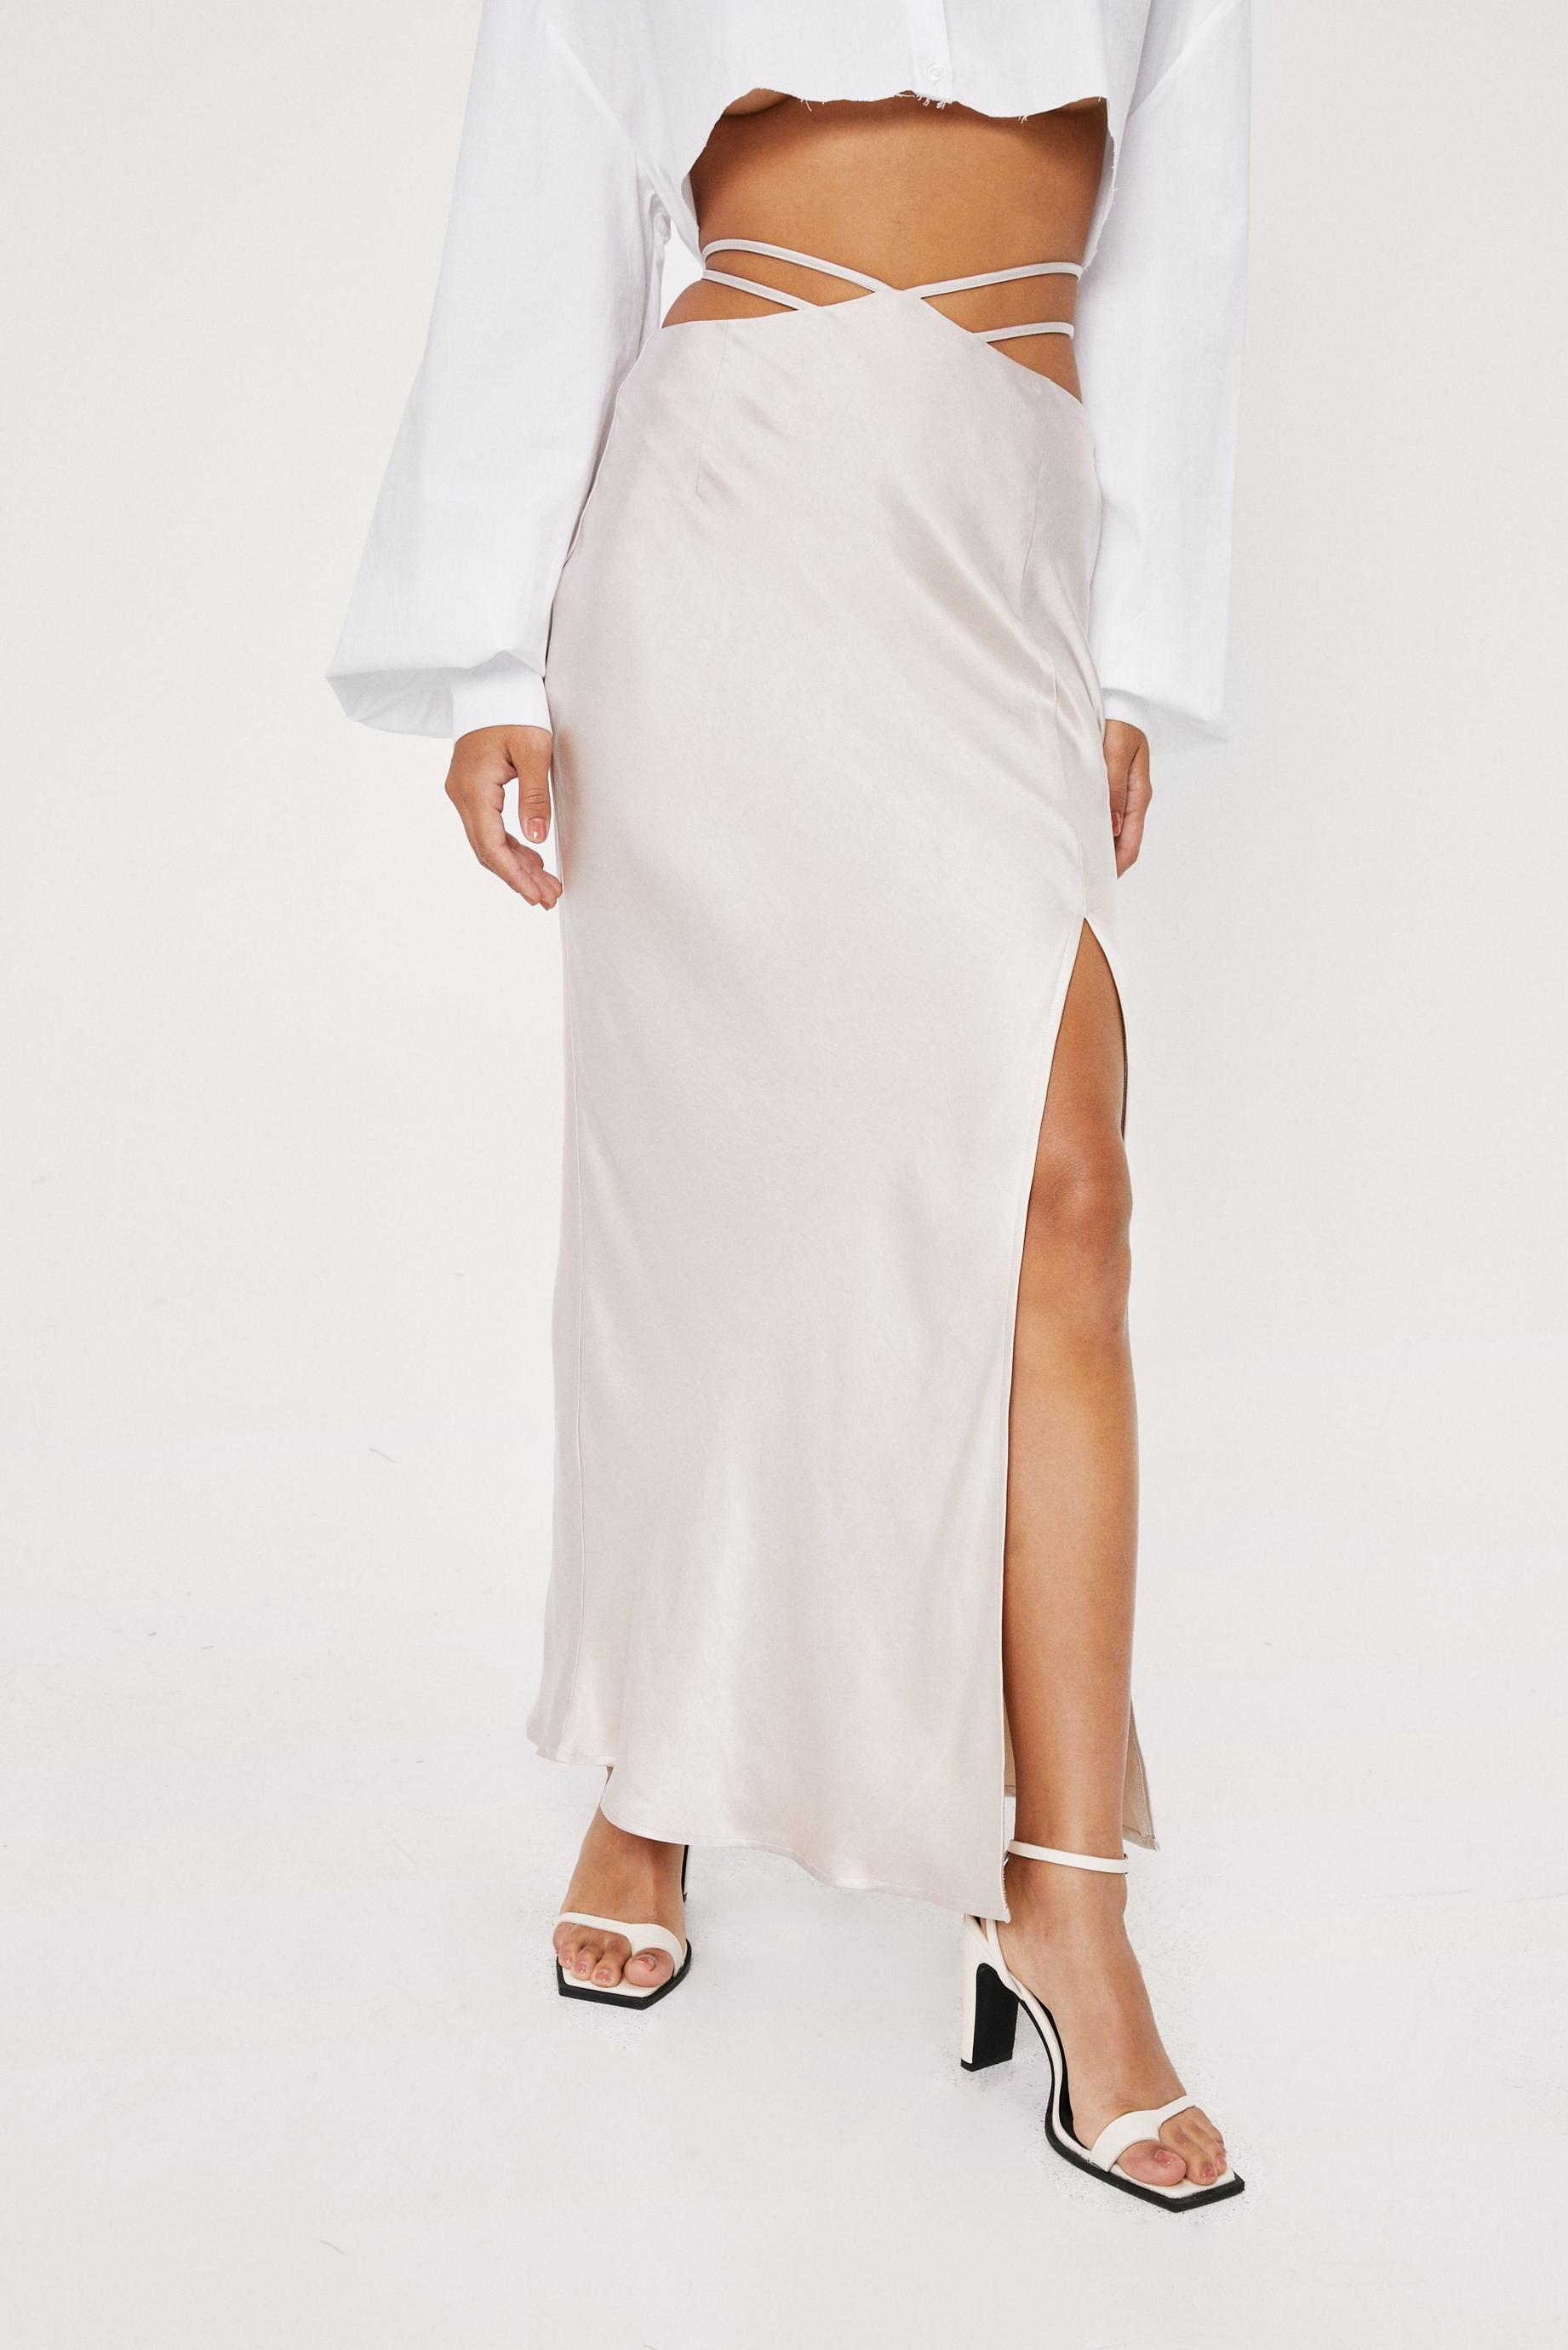 Satin Strappy Design Cut Out Maxi Skirt